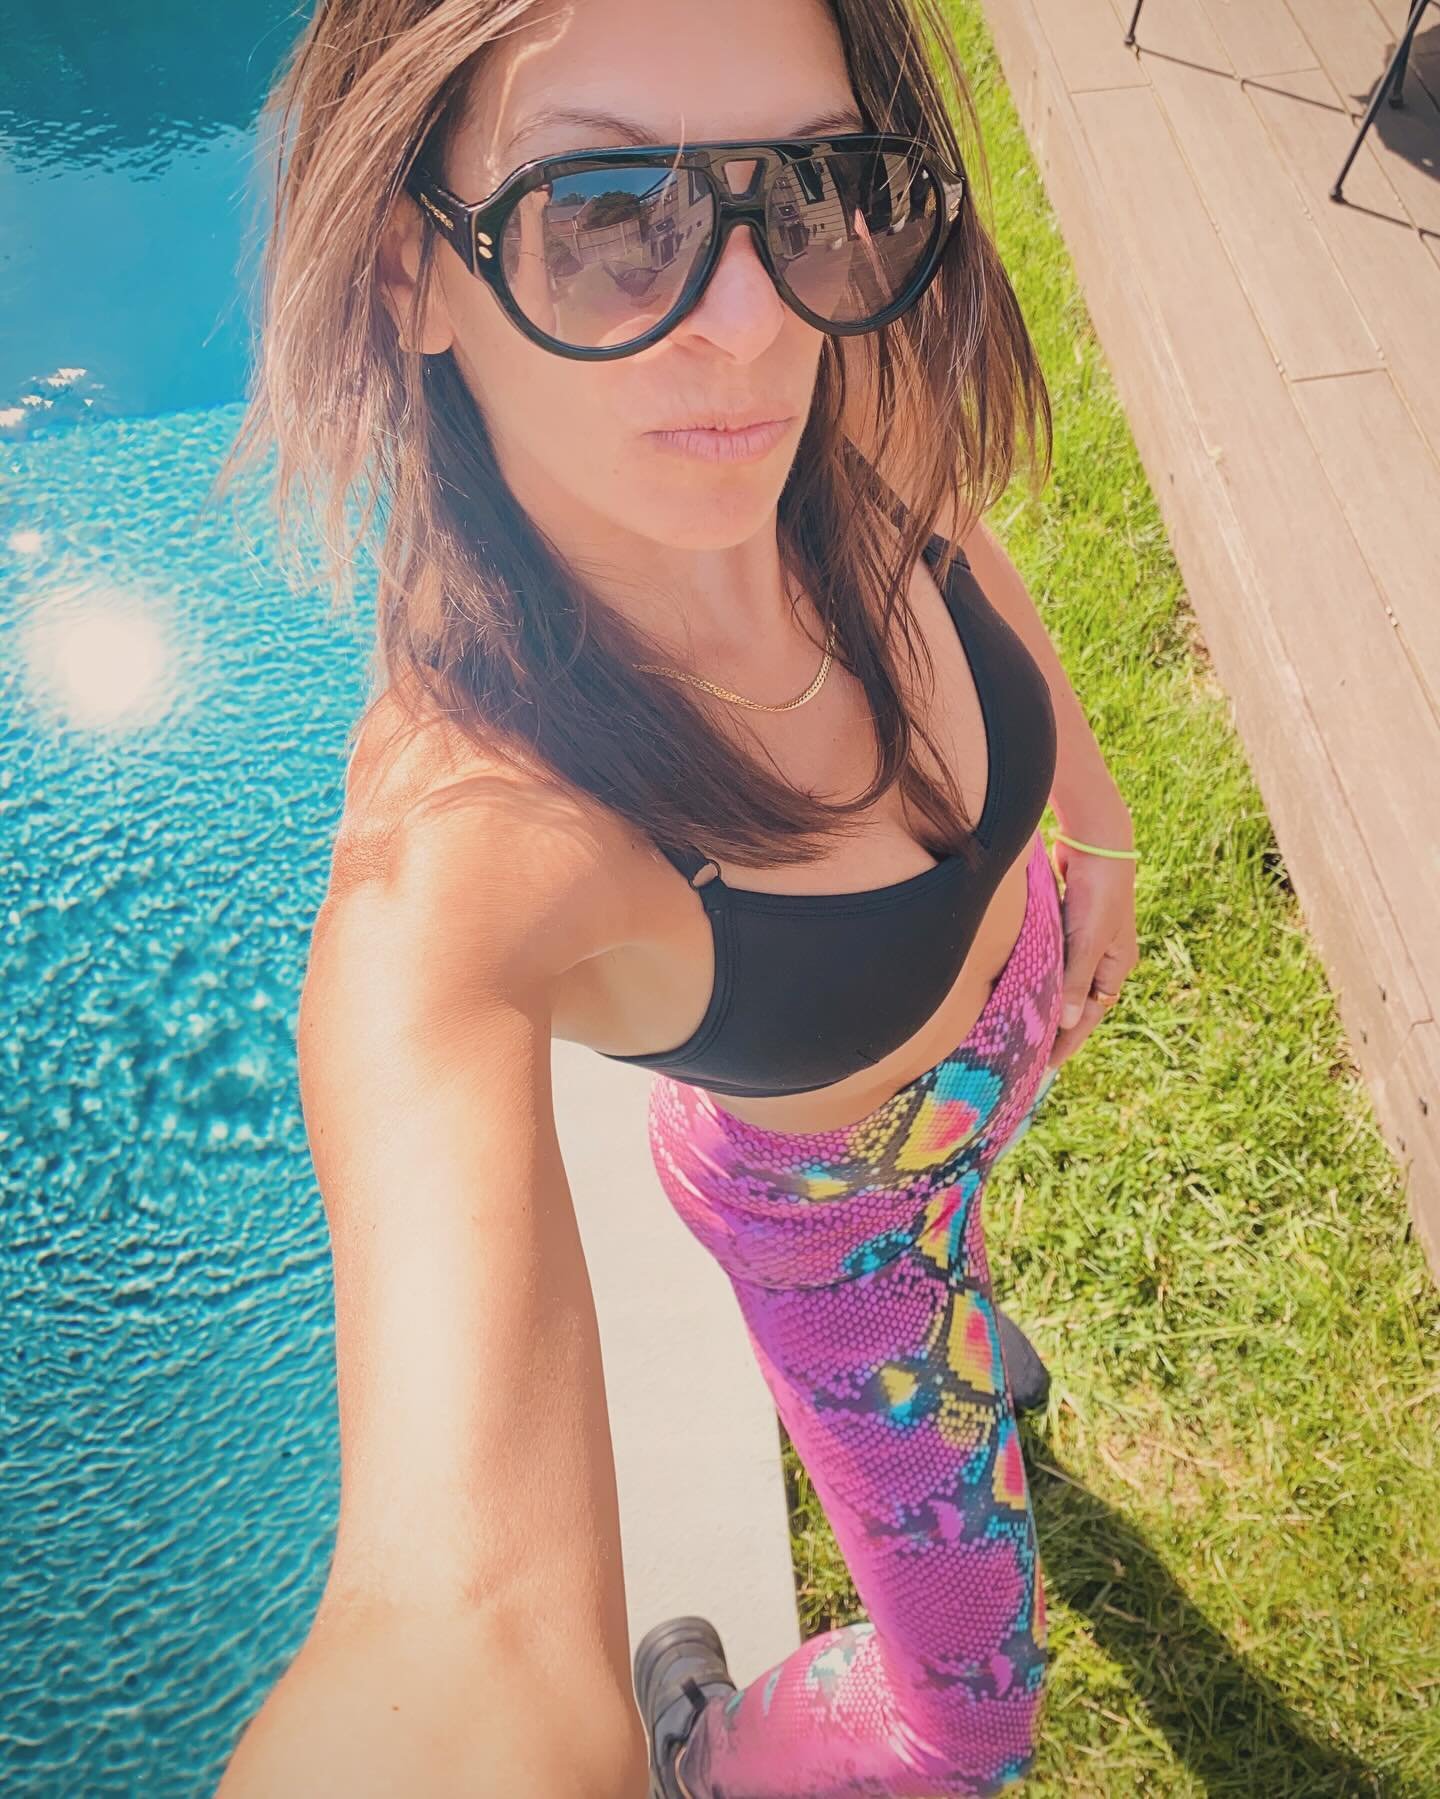 Python print coming in kaleidoscope, prints to love @fortheloveofrockstars Worldwide Shipping all orders shipped with tracking #python #leggings #loveleggings #leggingsaddict #fortheloveofrockstars #poolside #workout #wellness #wellbeing #sunmer #fit